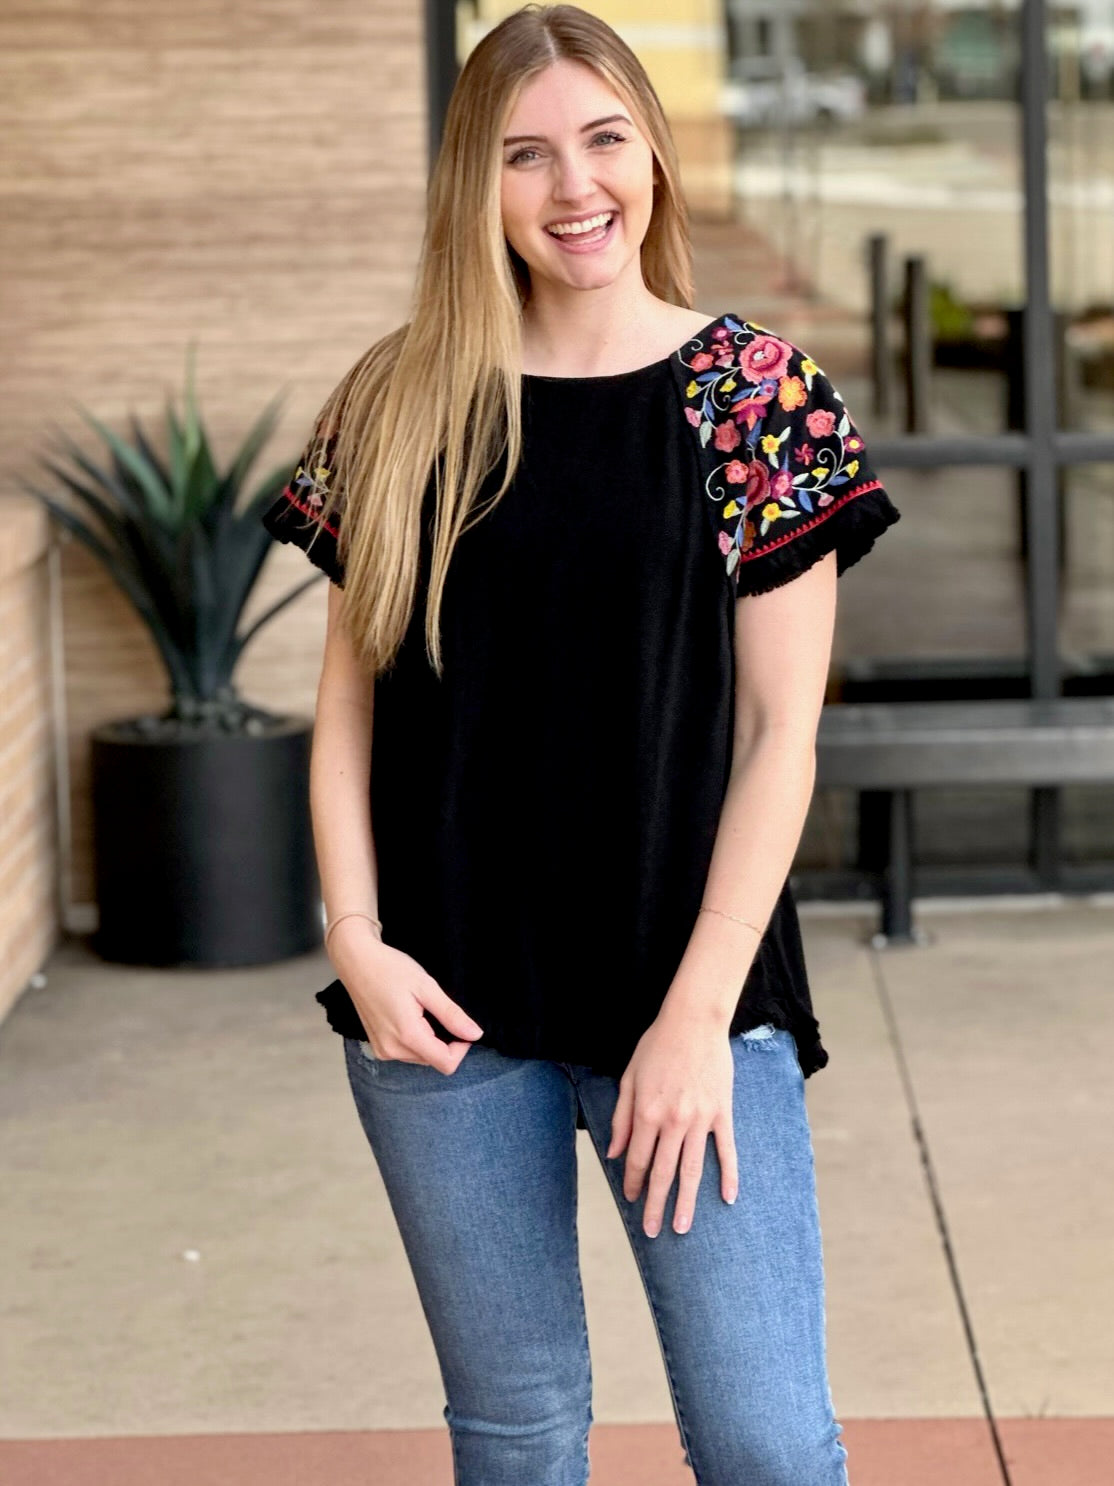 Lexi in black blouse front view smiling